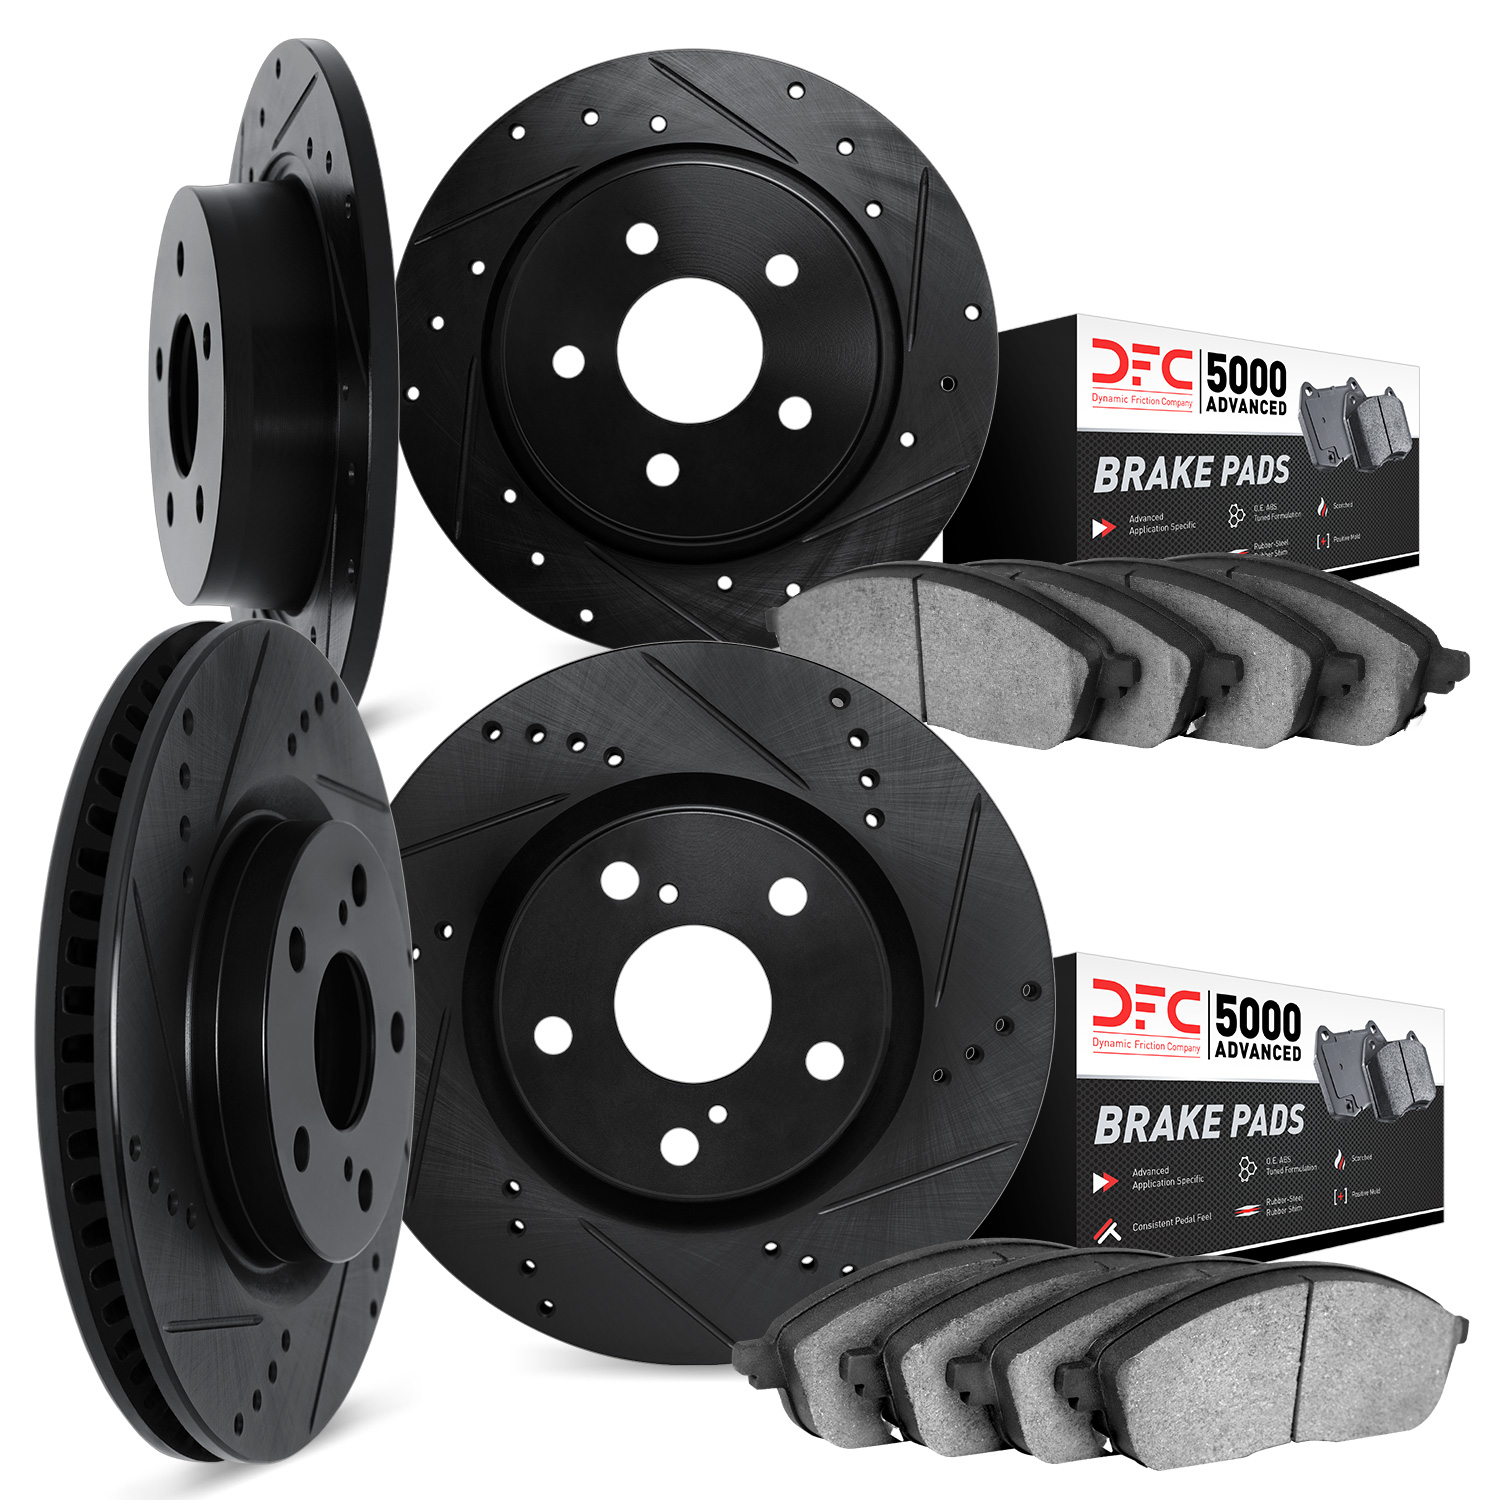 8504-67076 Drilled/Slotted Brake Rotors w/5000 Advanced Brake Pads Kit [Black], 1987-1988 Infiniti/Nissan, Position: Front and R